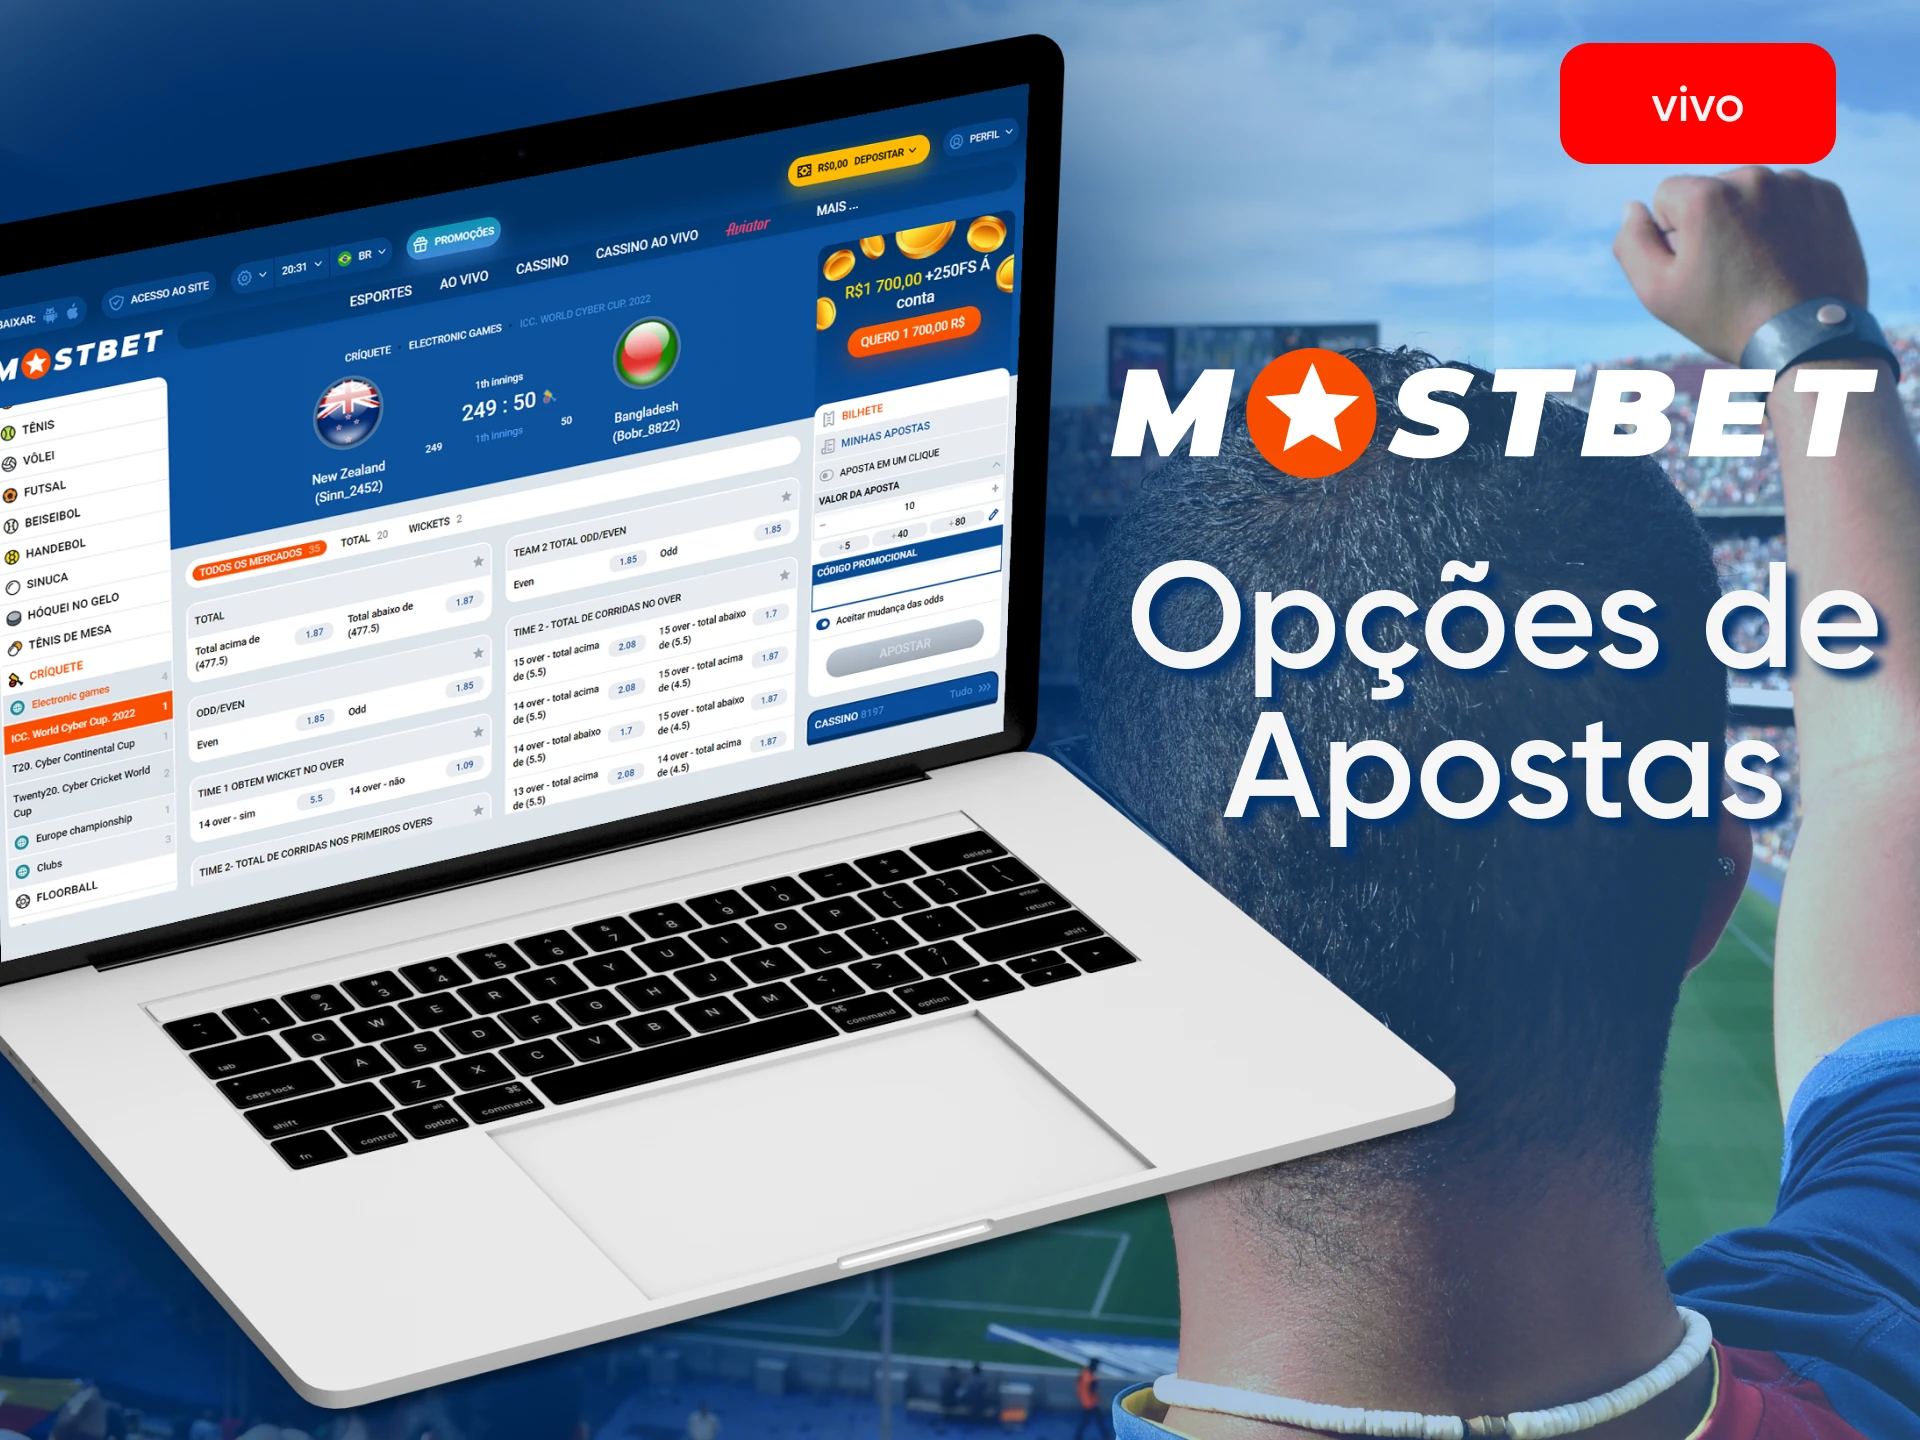 Choose different betting options with Mostbet.